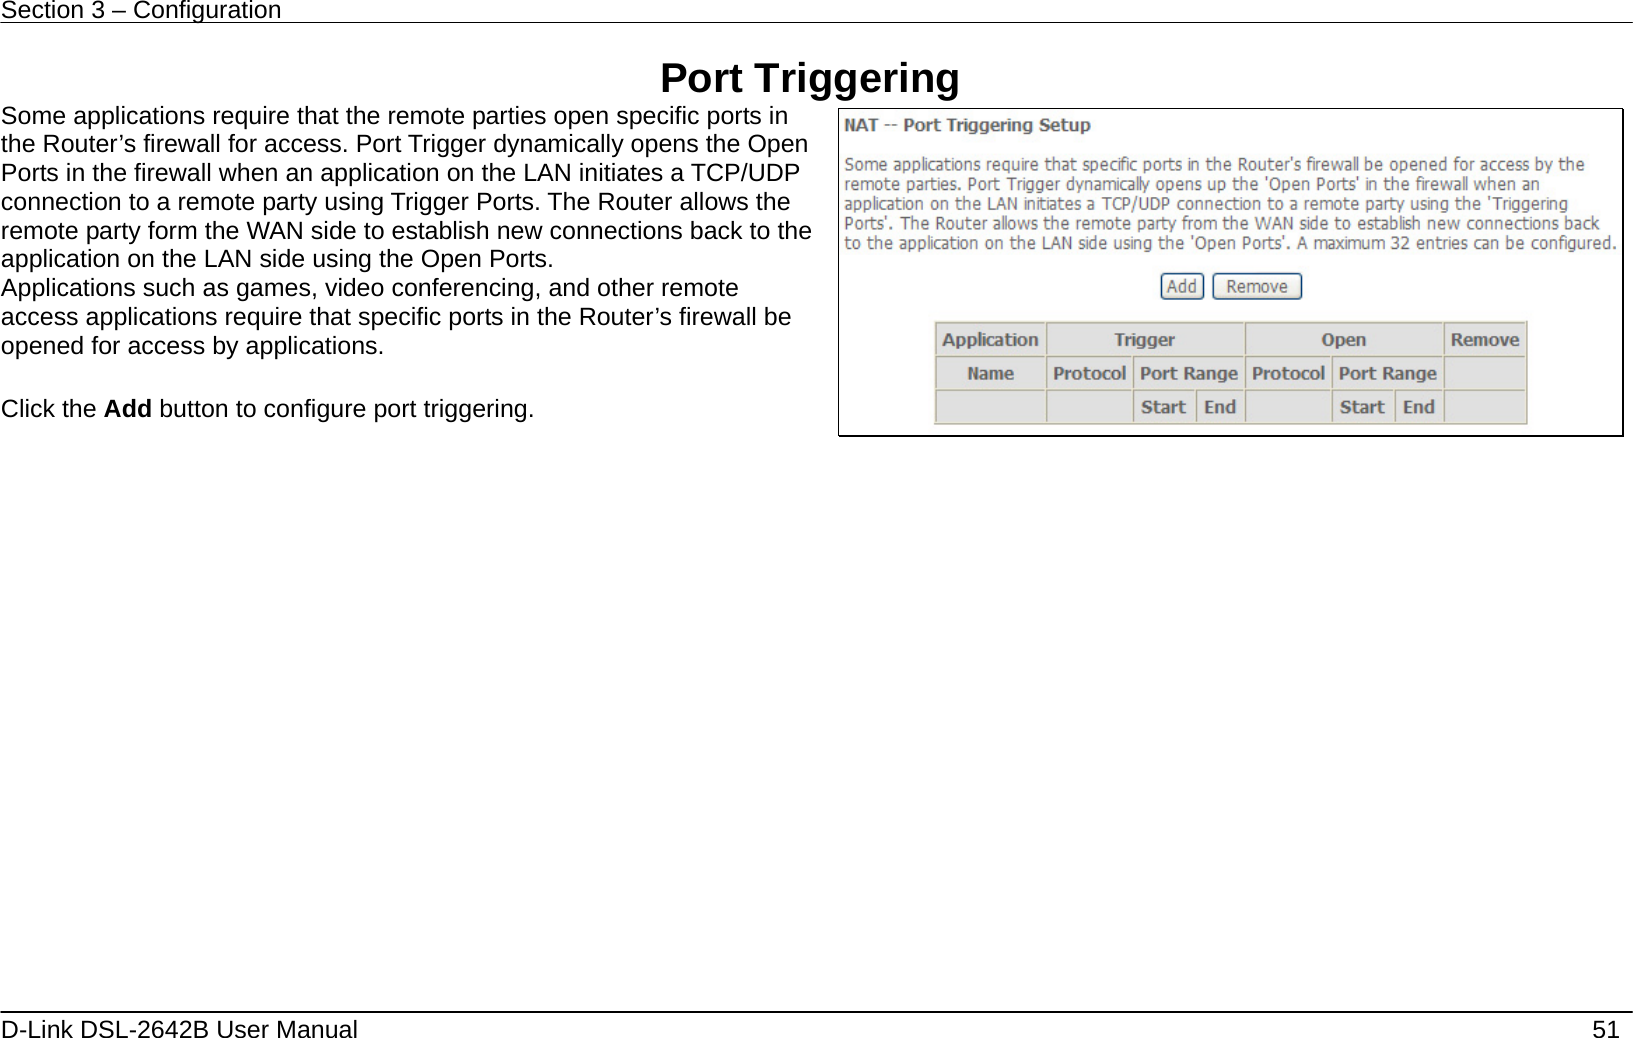 Section 3 – Configuration   D-Link DSL-2642B User Manual    51 Port Triggering Some applications require that the remote parties open specific ports in the Router’s firewall for access. Port Trigger dynamically opens the Open Ports in the firewall when an application on the LAN initiates a TCP/UDP connection to a remote party using Trigger Ports. The Router allows the remote party form the WAN side to establish new connections back to the application on the LAN side using the Open Ports. Applications such as games, video conferencing, and other remote access applications require that specific ports in the Router’s firewall be opened for access by applications.    Click the Add button to configure port triggering.      